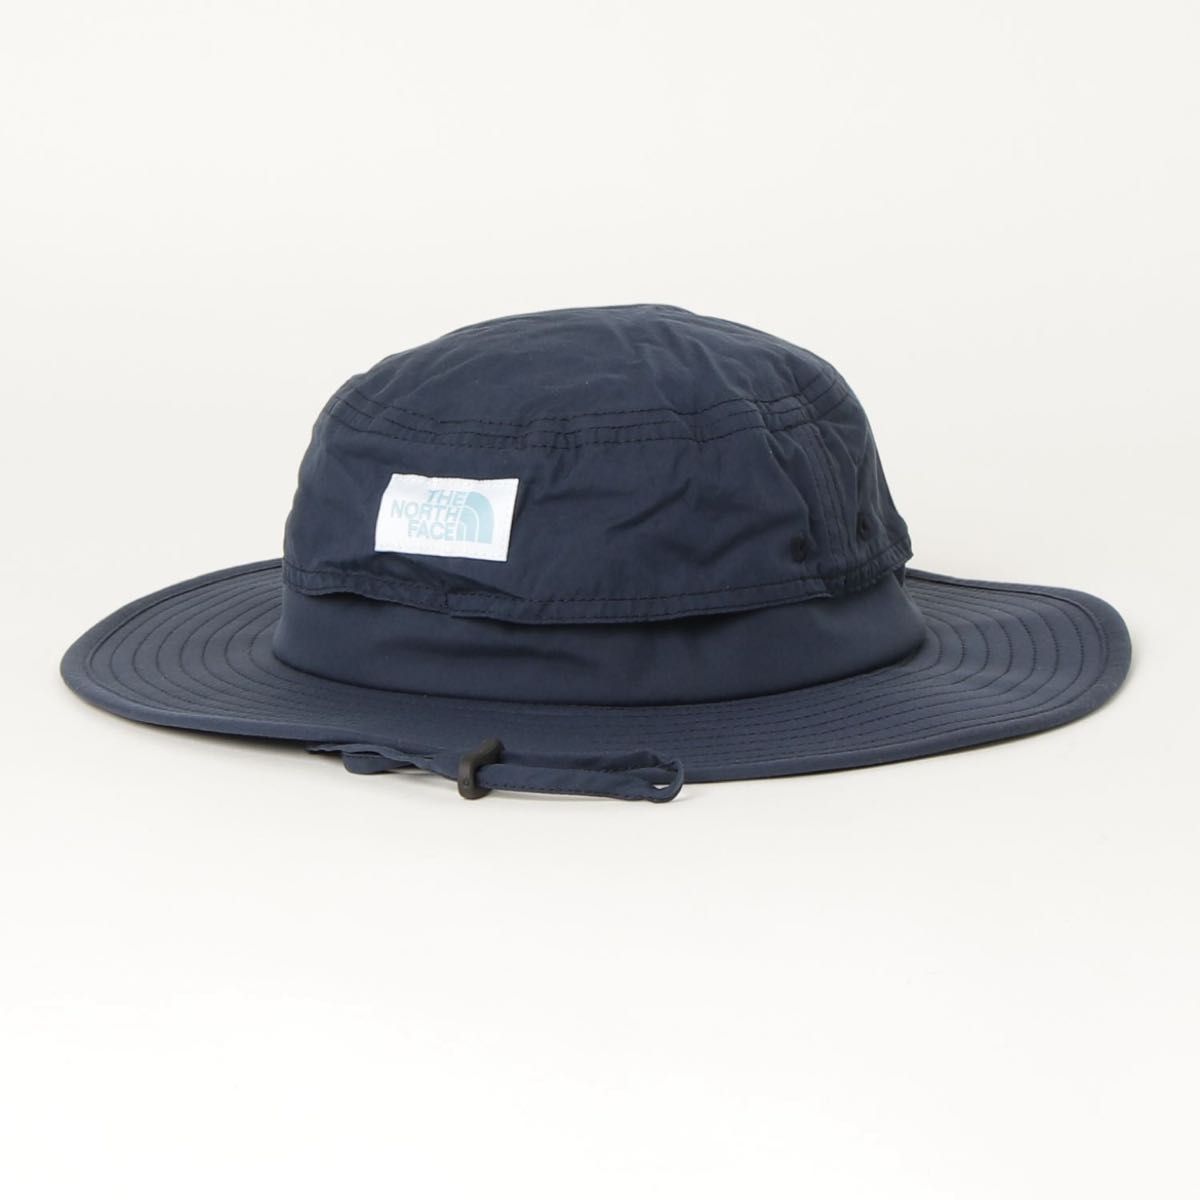 THE NORTH FACE Horizon HAT ホライズンハット